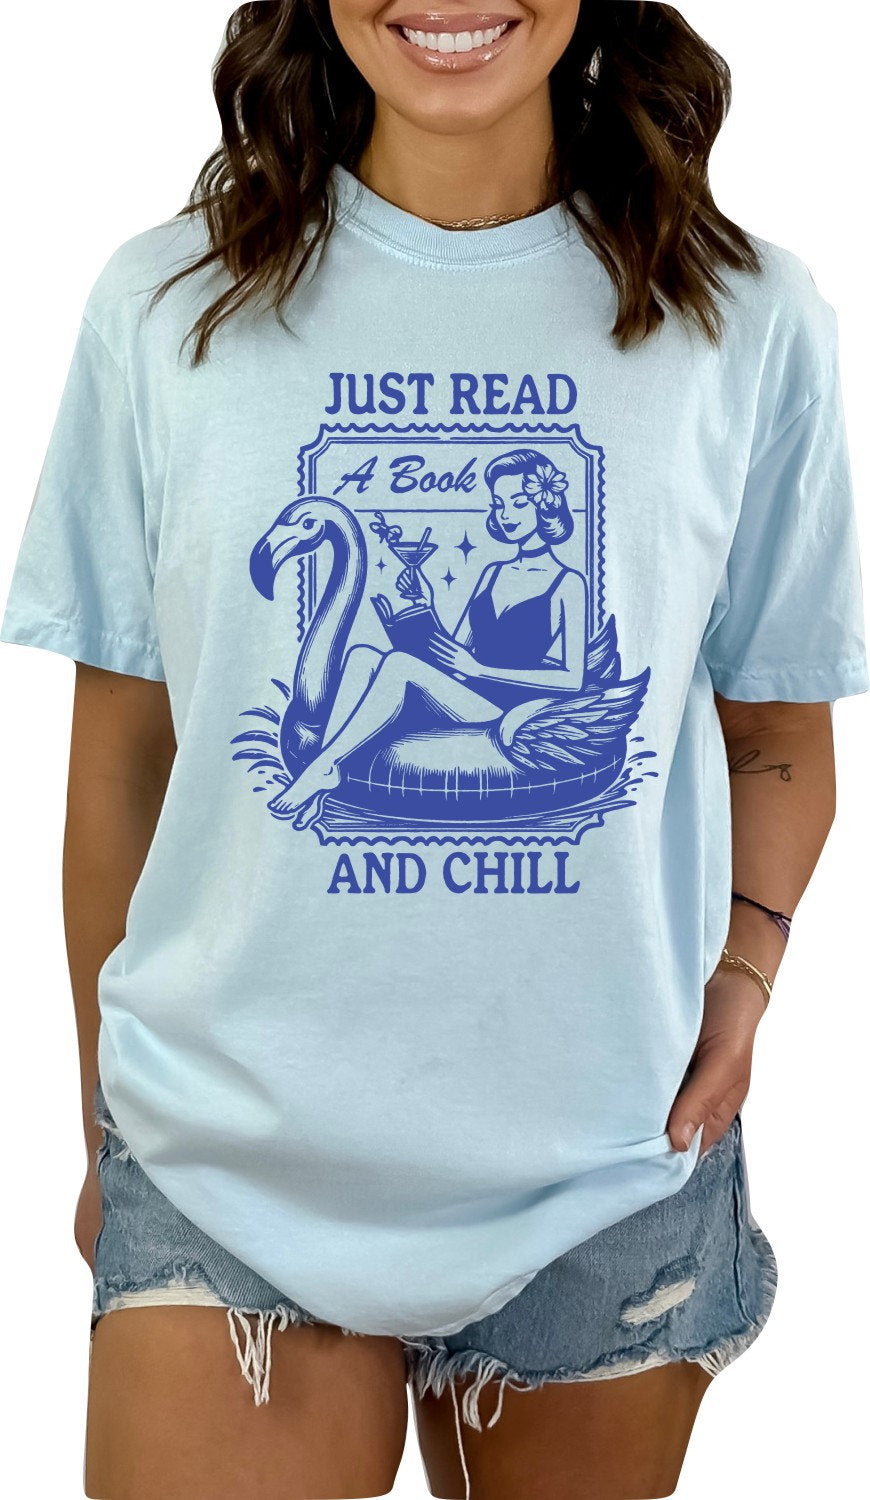 Book Shirt Just Read a Book and Chill TShirt Book Lover Shirt Book T Shirt women Reading Shirts Book Club Shirt Comfort Colors